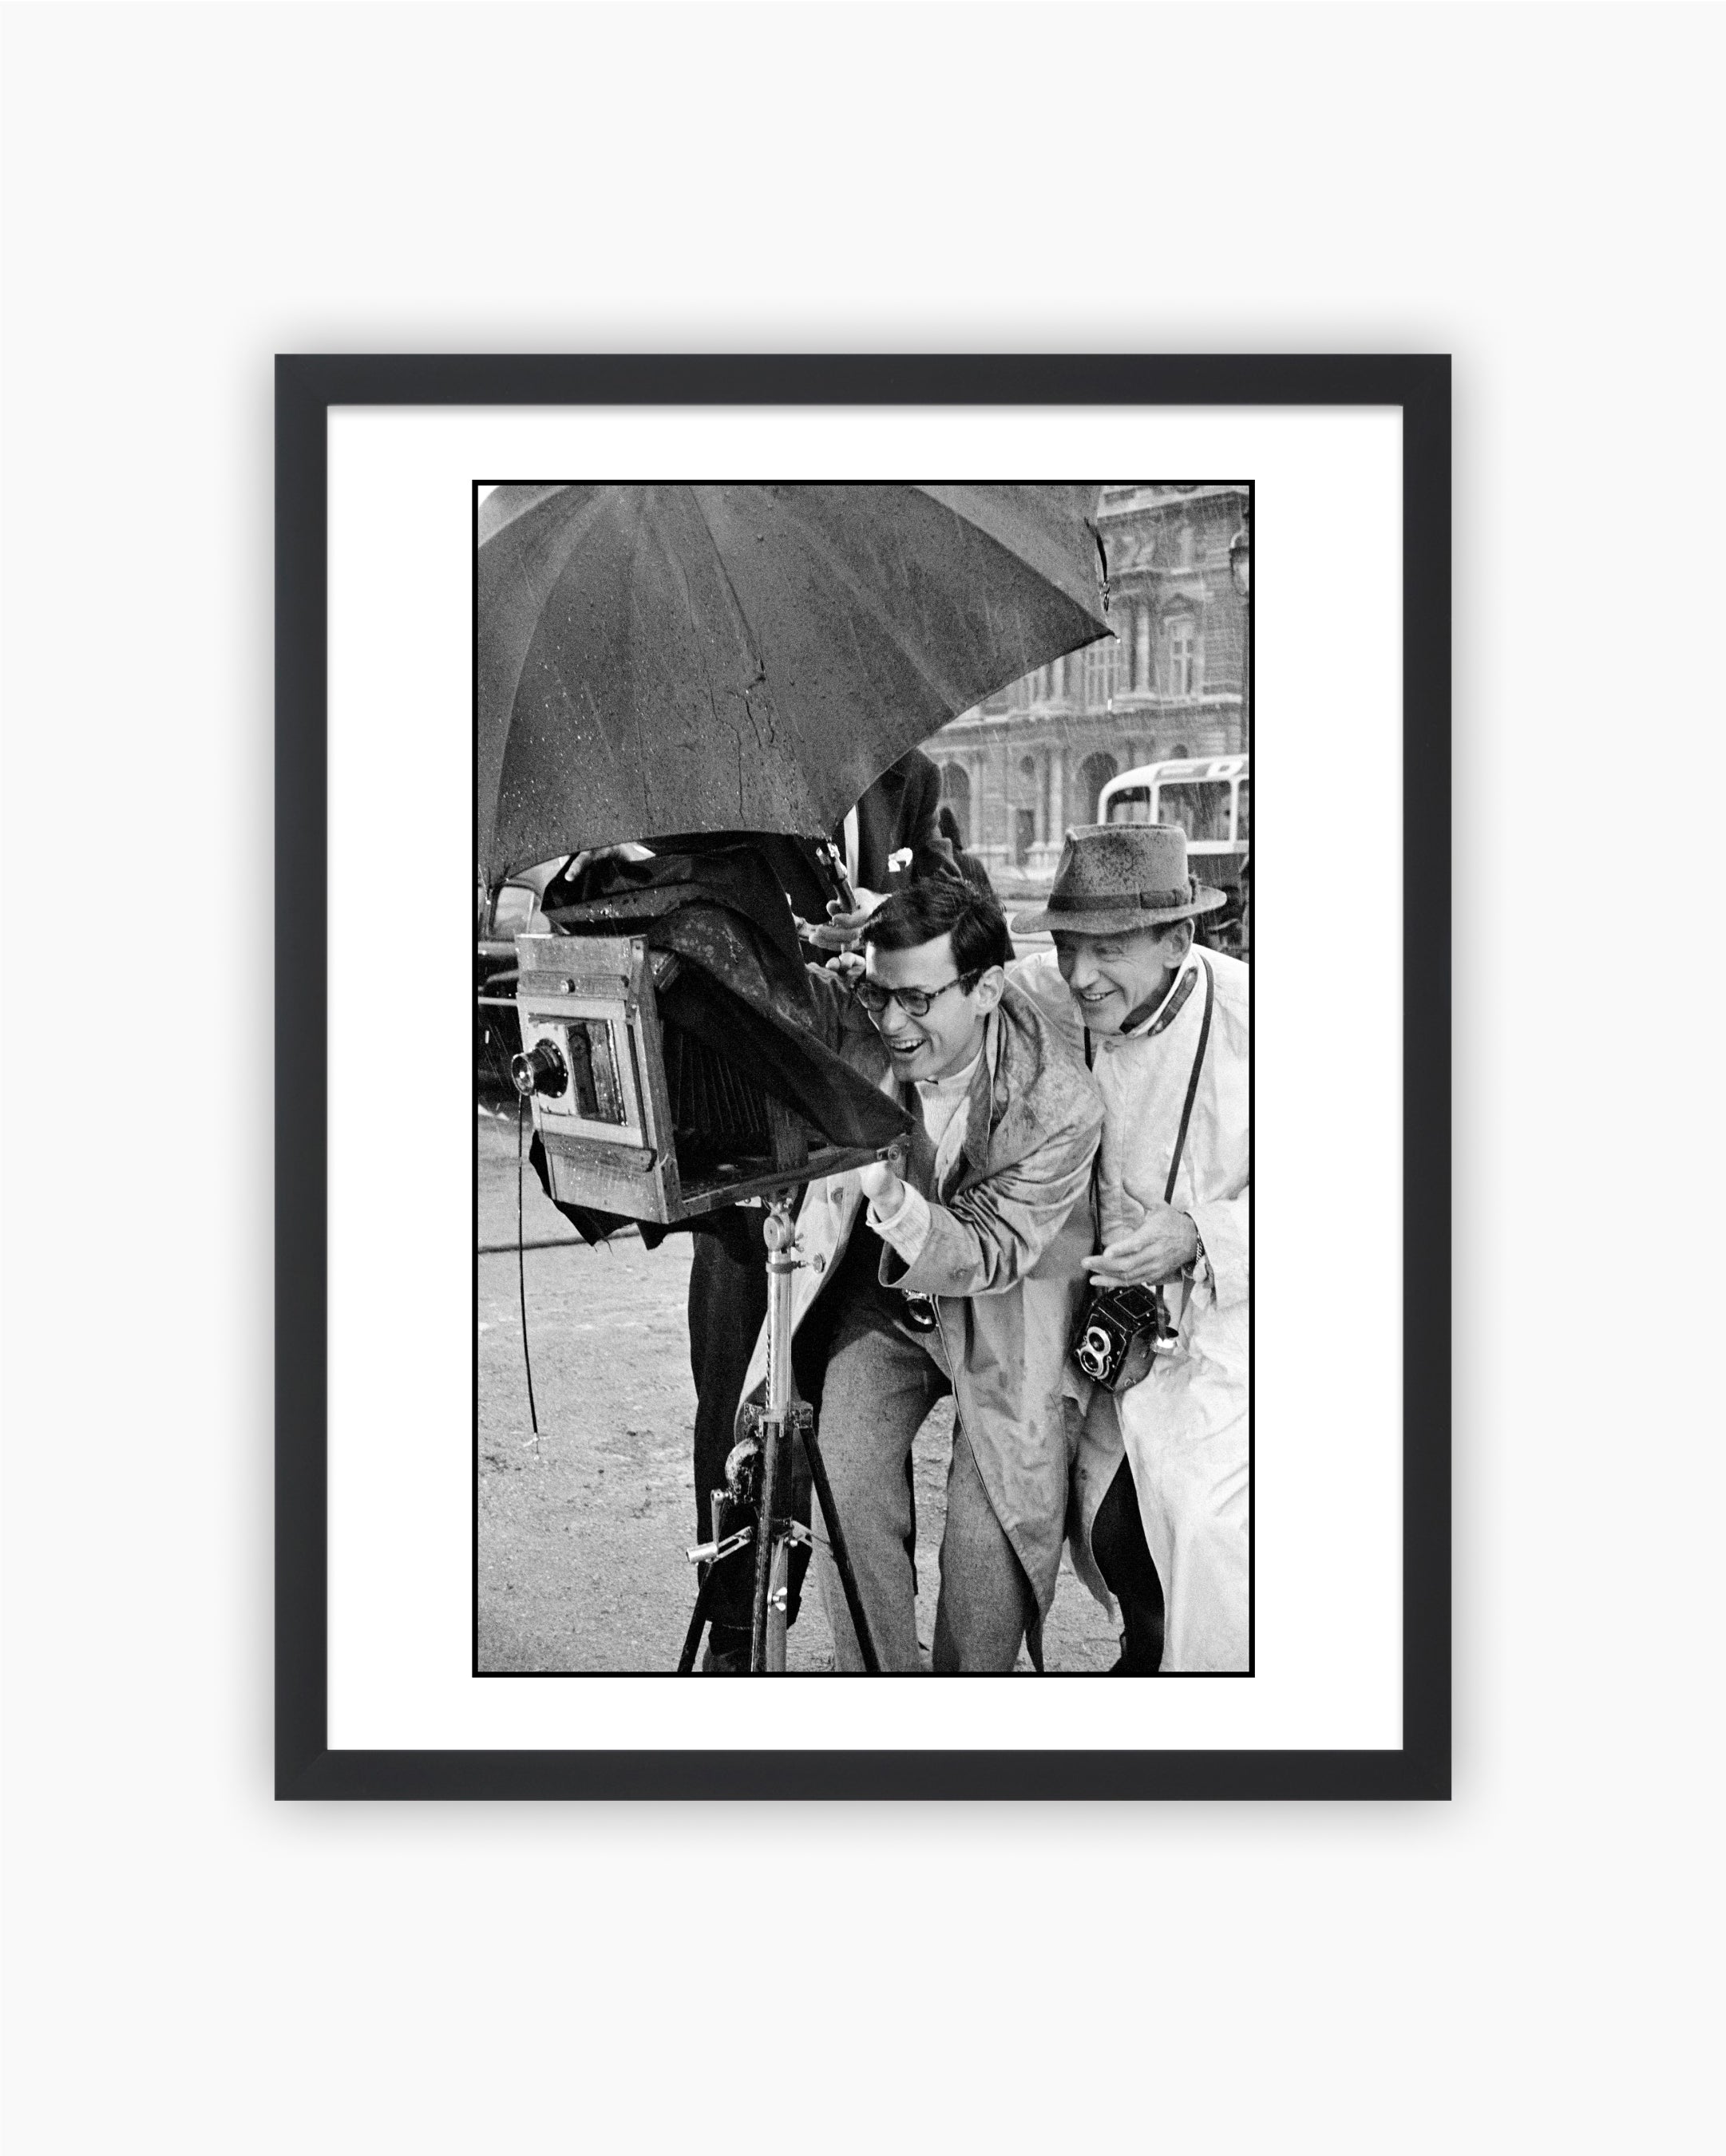 Magnum Editions: Fred Astaire & Richard Avedon. Paris, France